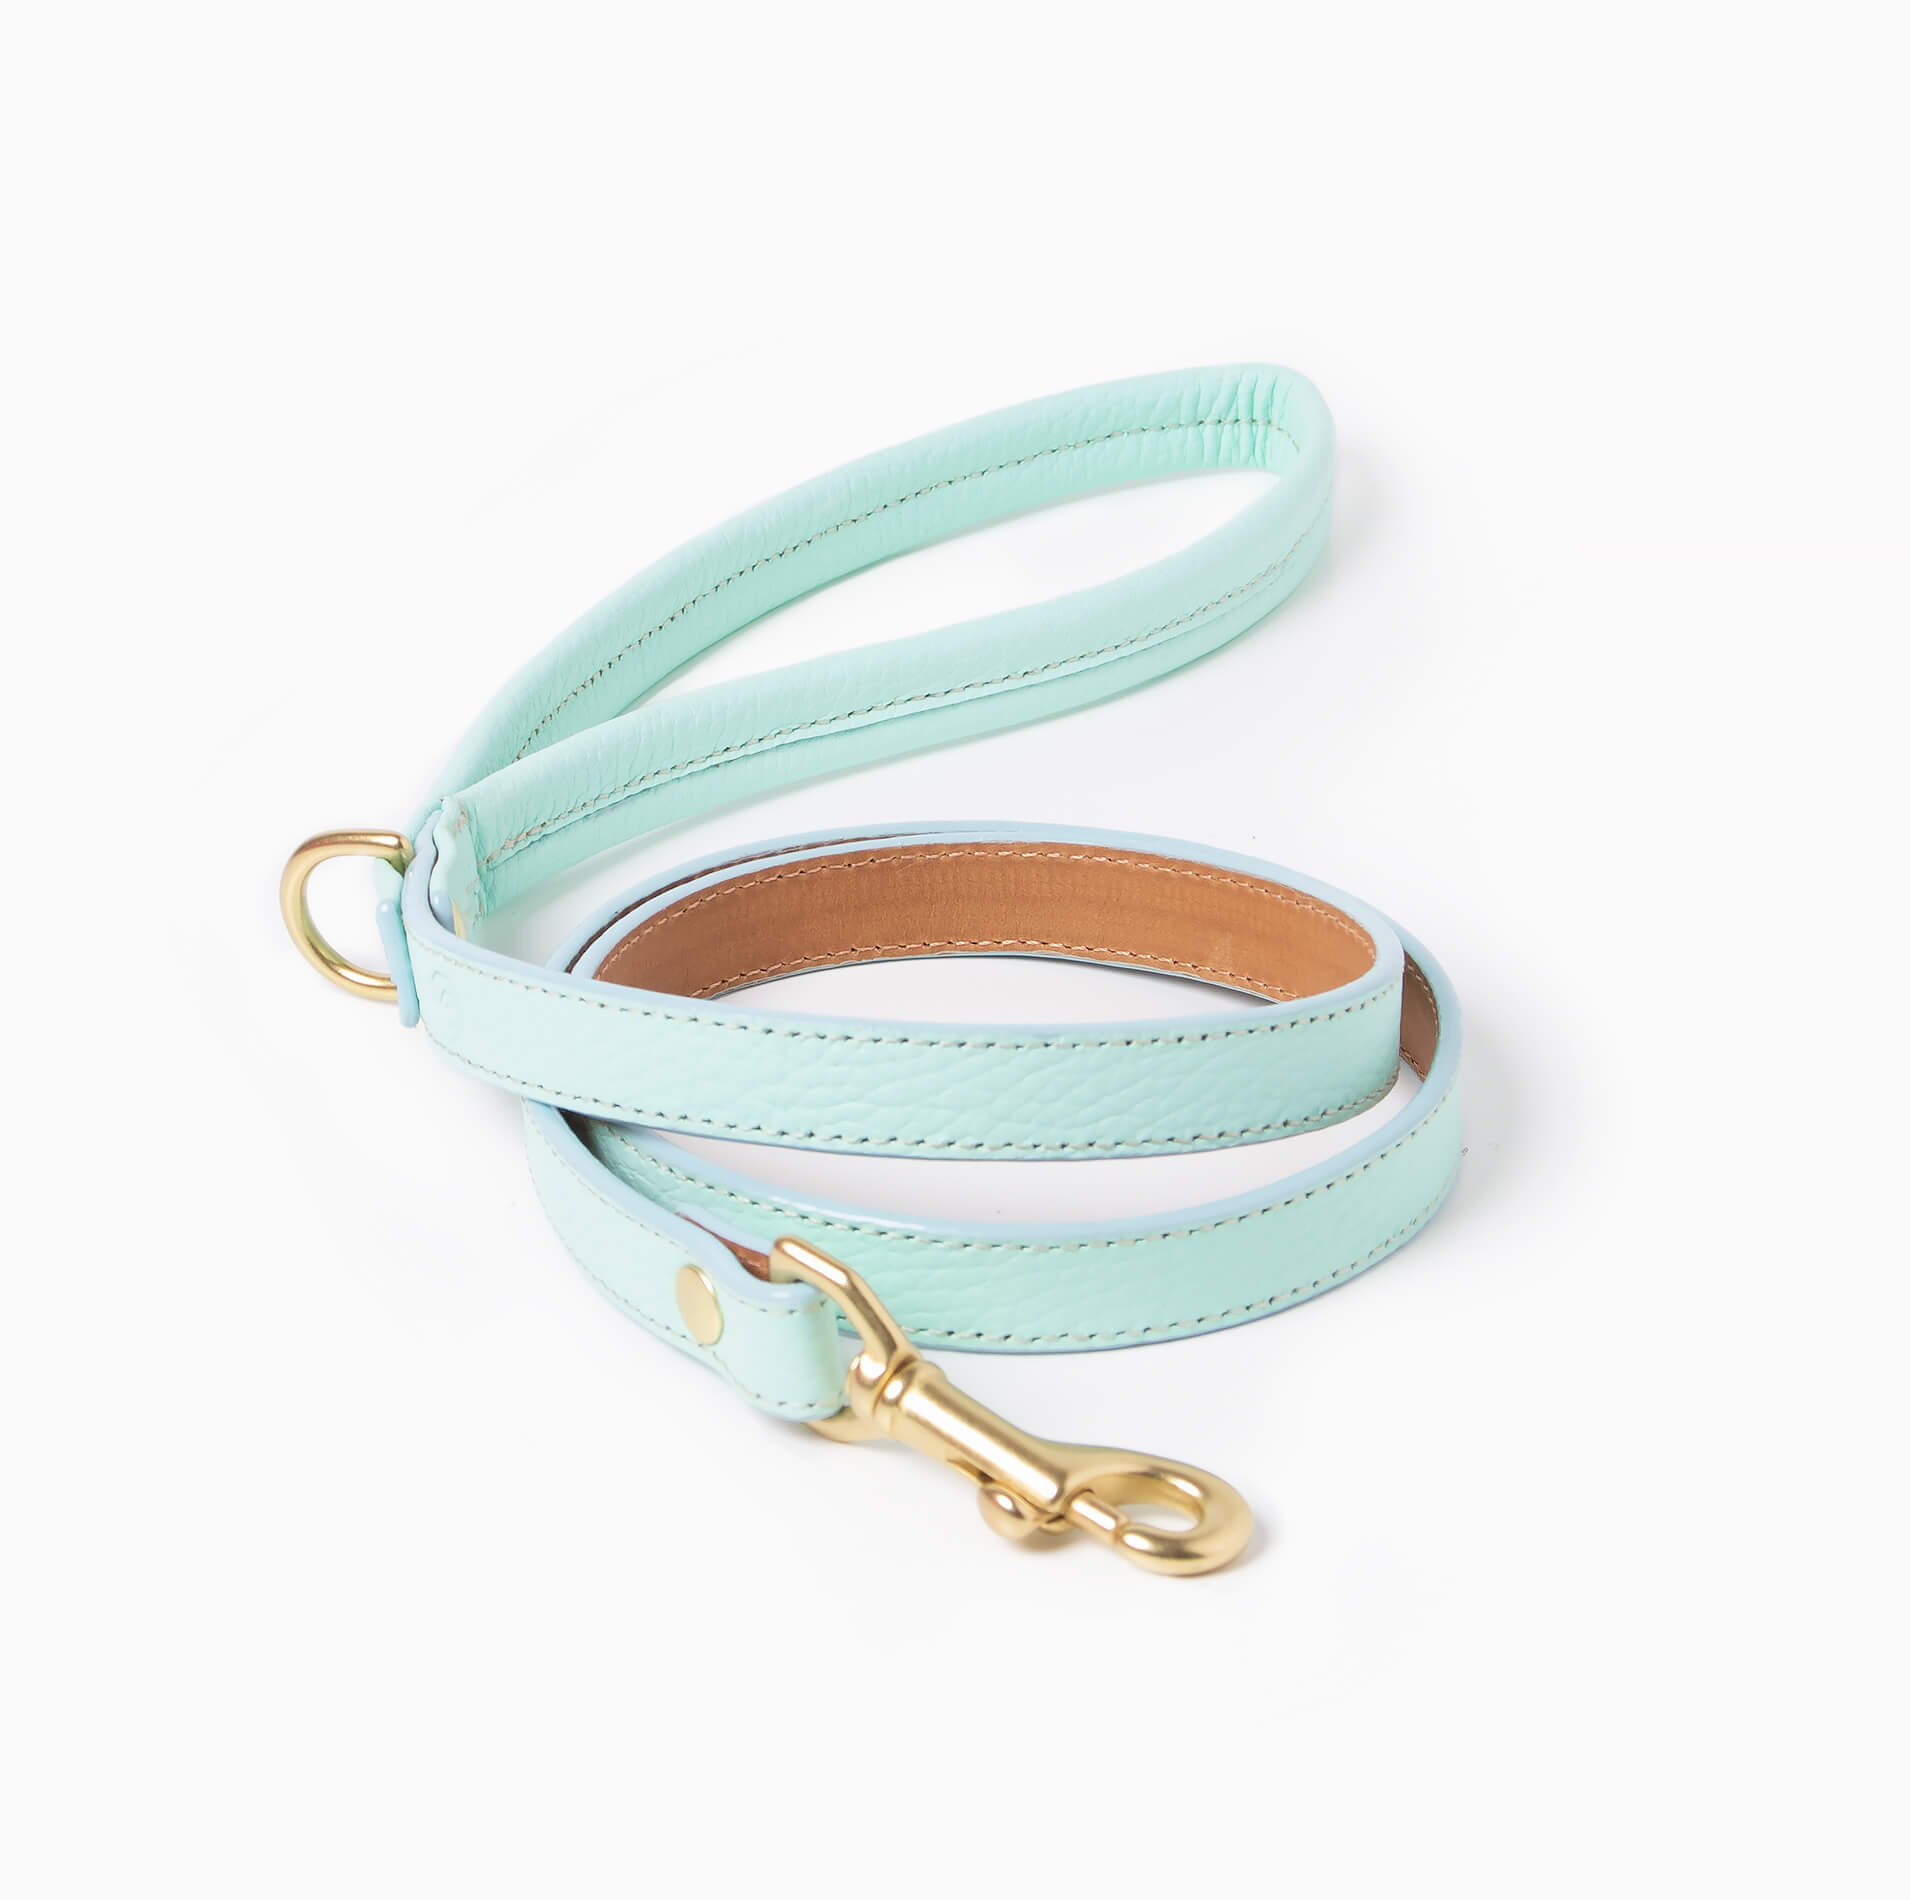 Mint leather dog leash with brass hardware